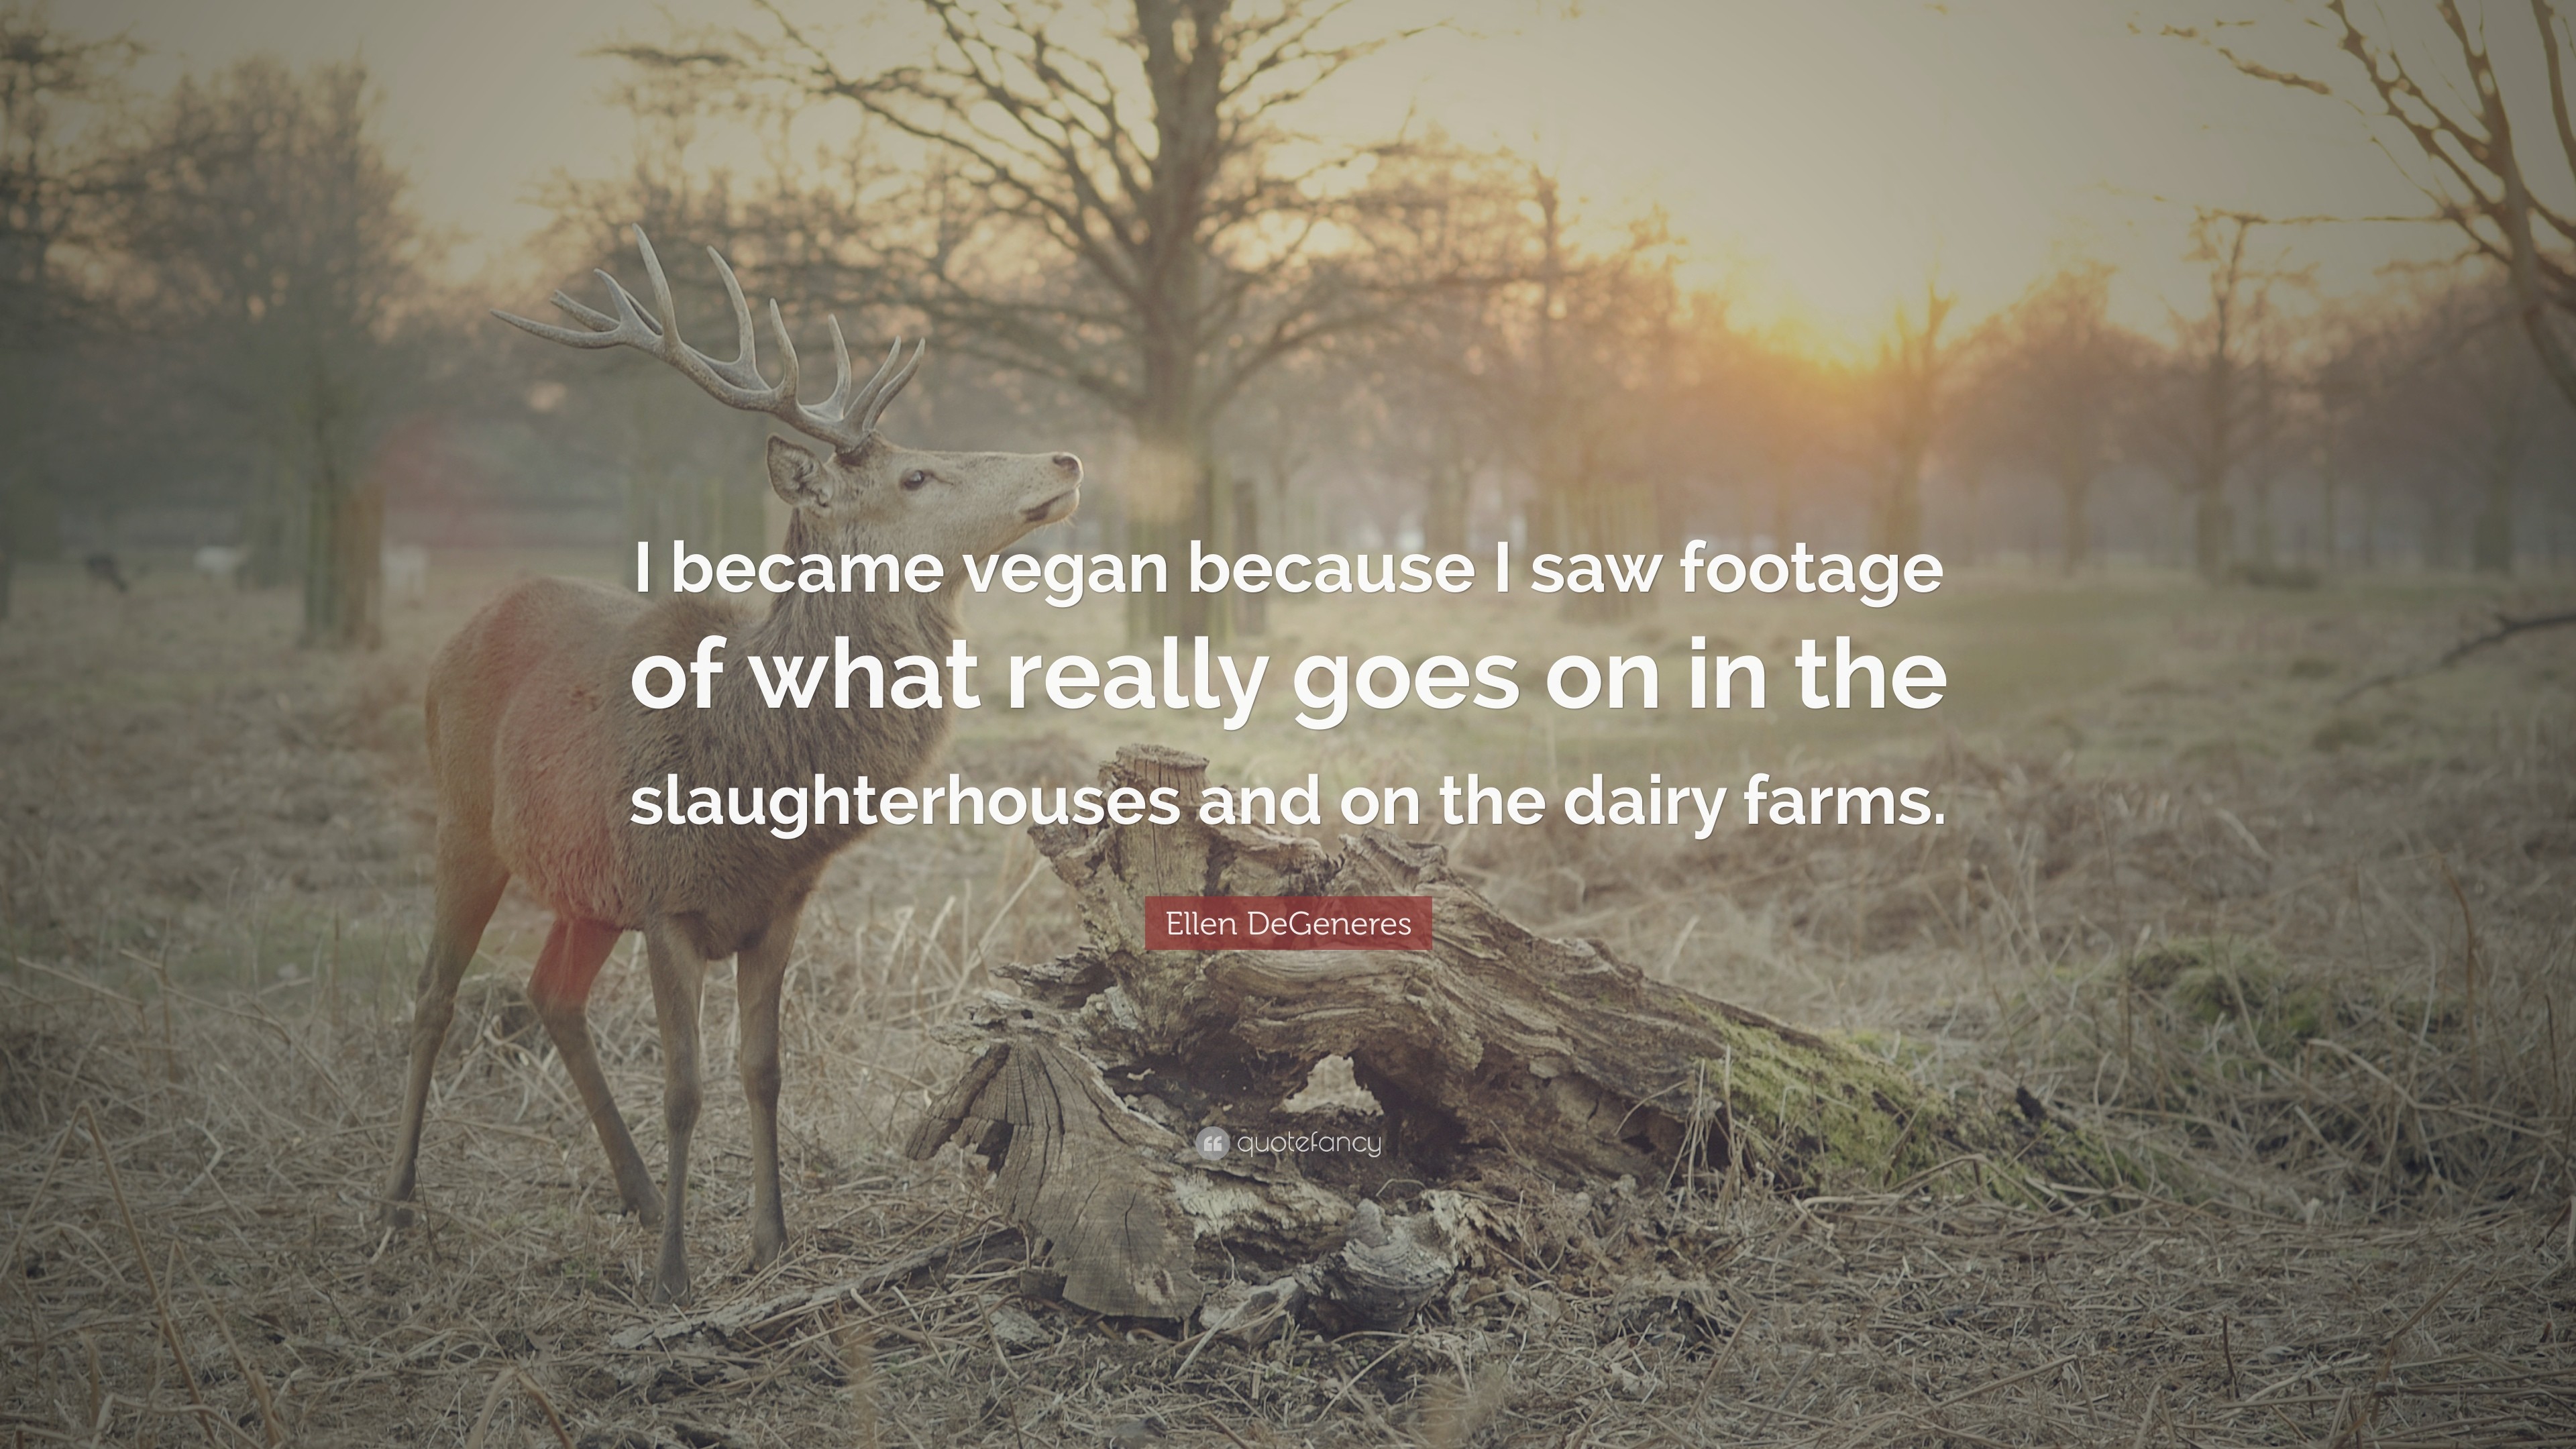 3840x2160 Quotes About Veganism: “I became vegan because I saw footage of what really  goes